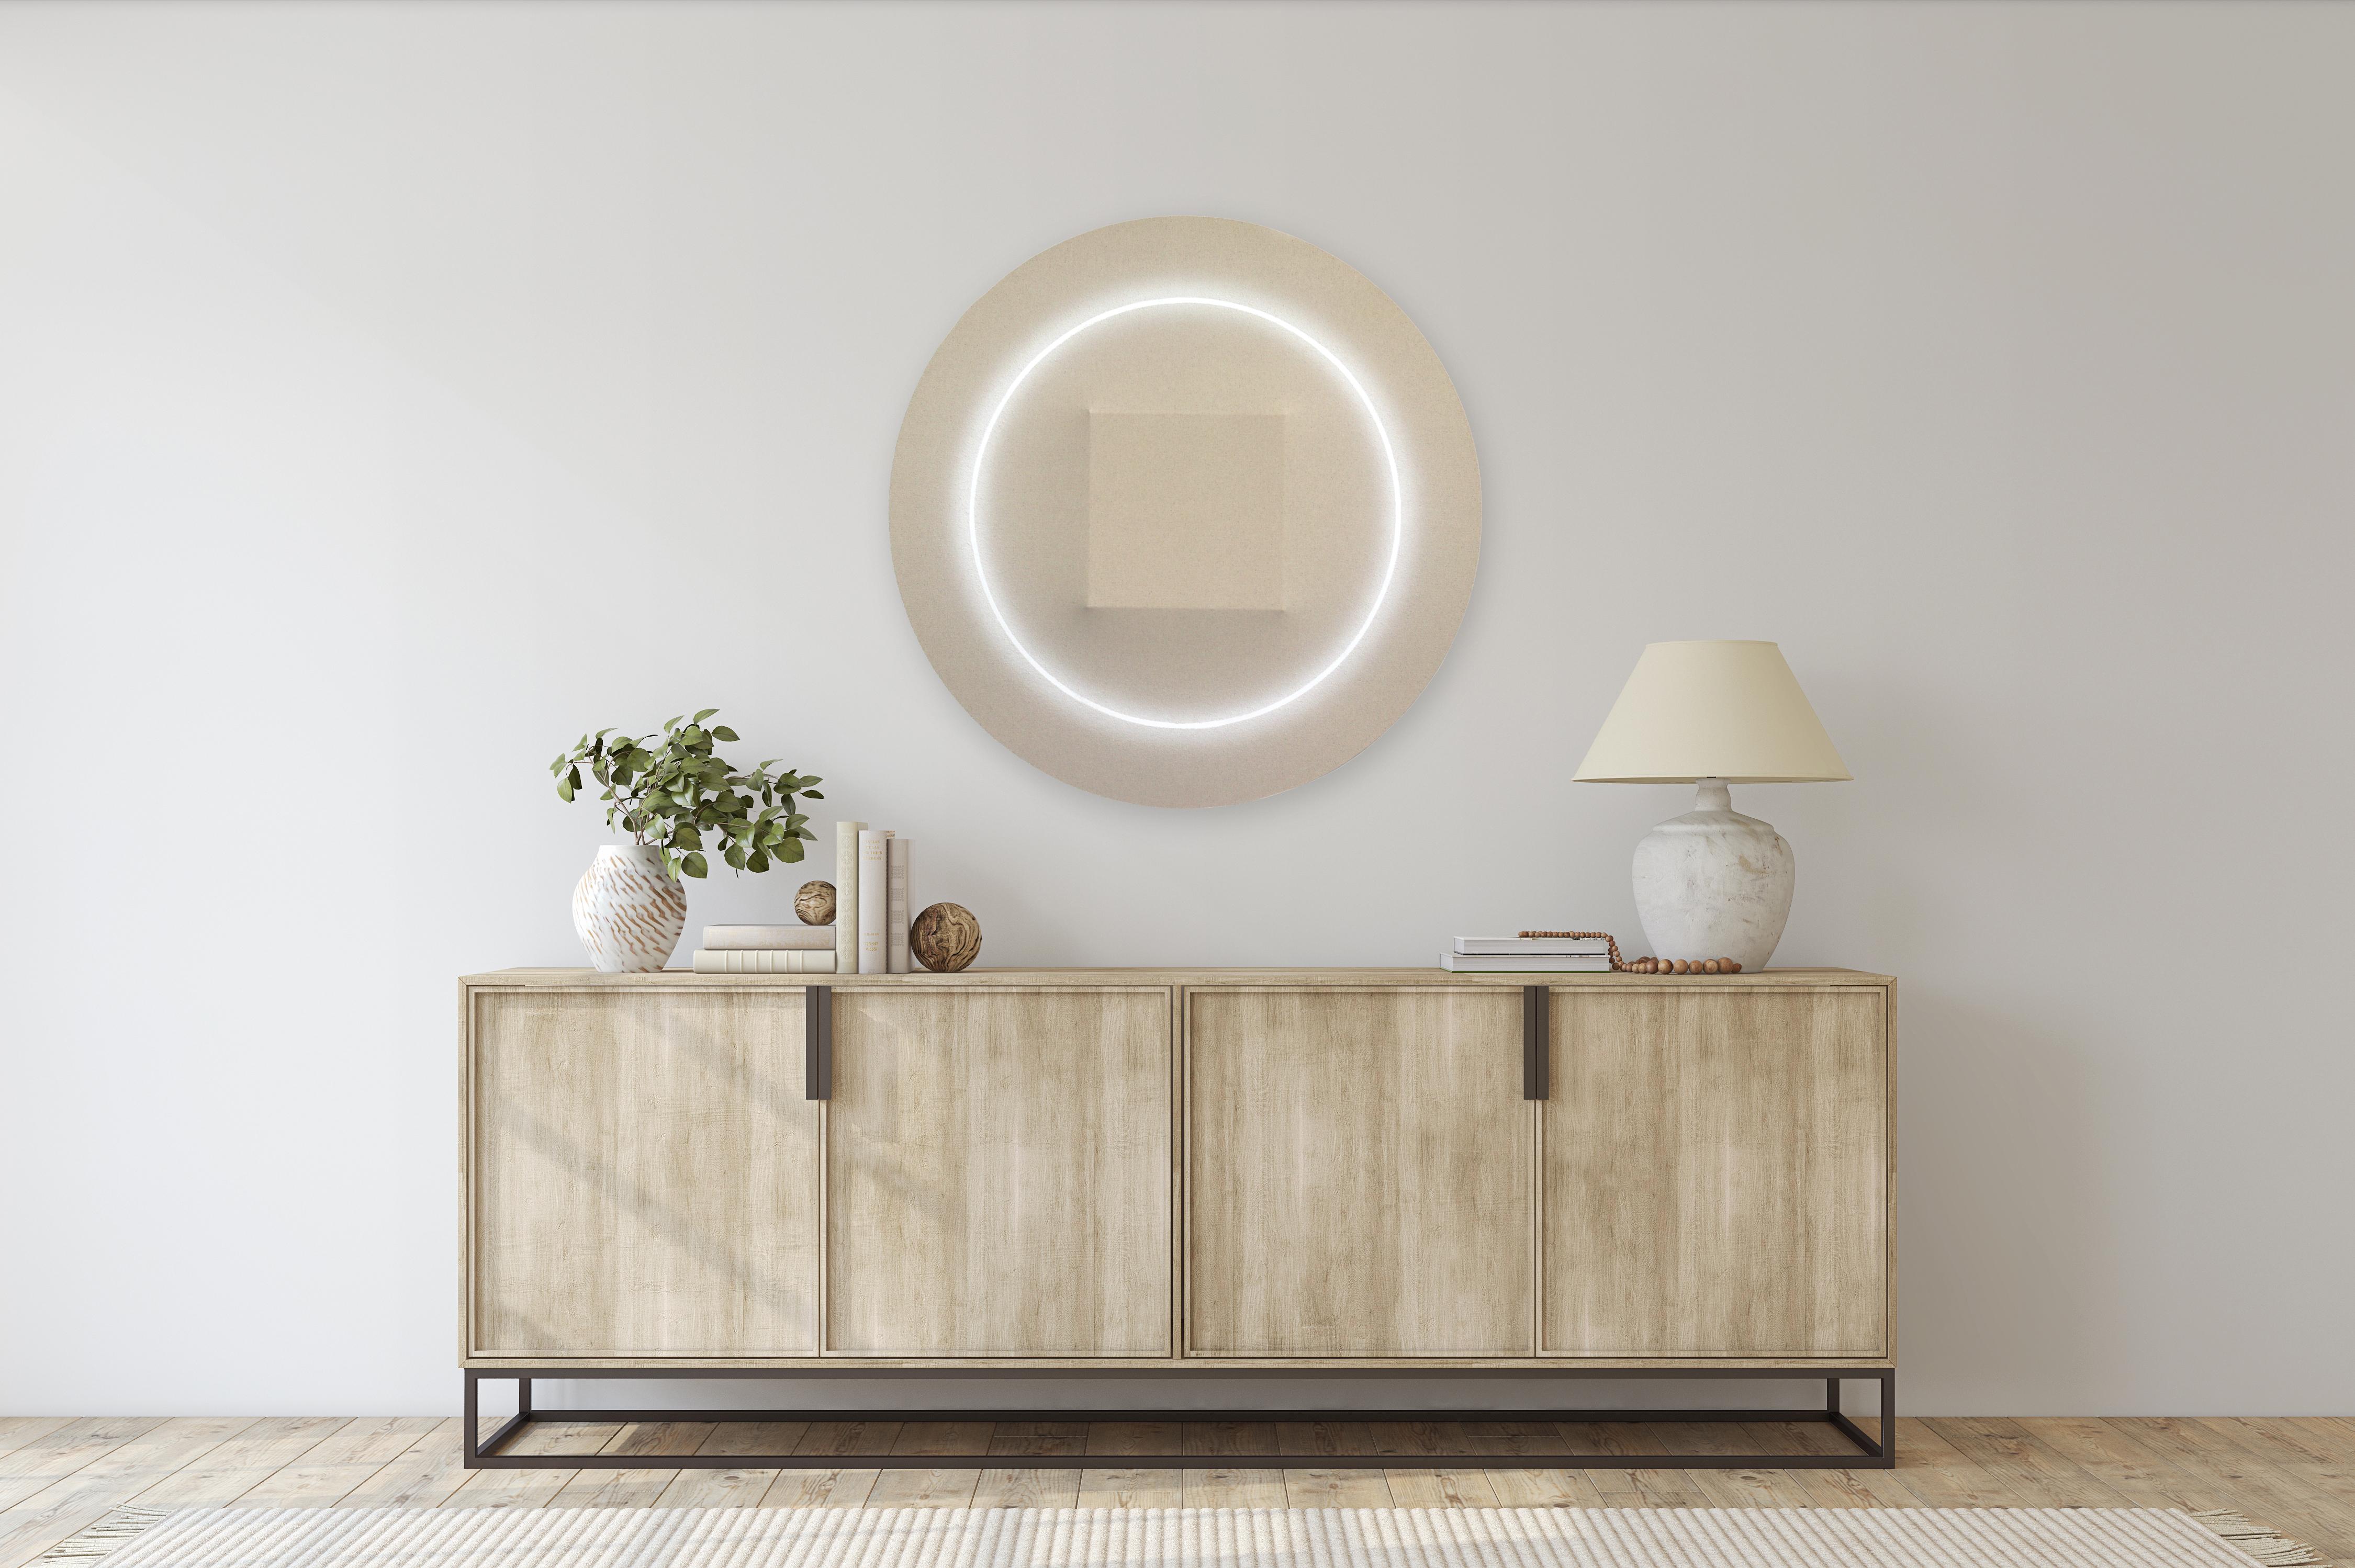 Halo Orb Squared - Minimalist Dimensional Architectural Wall Sculpture Artwork For Sale 3